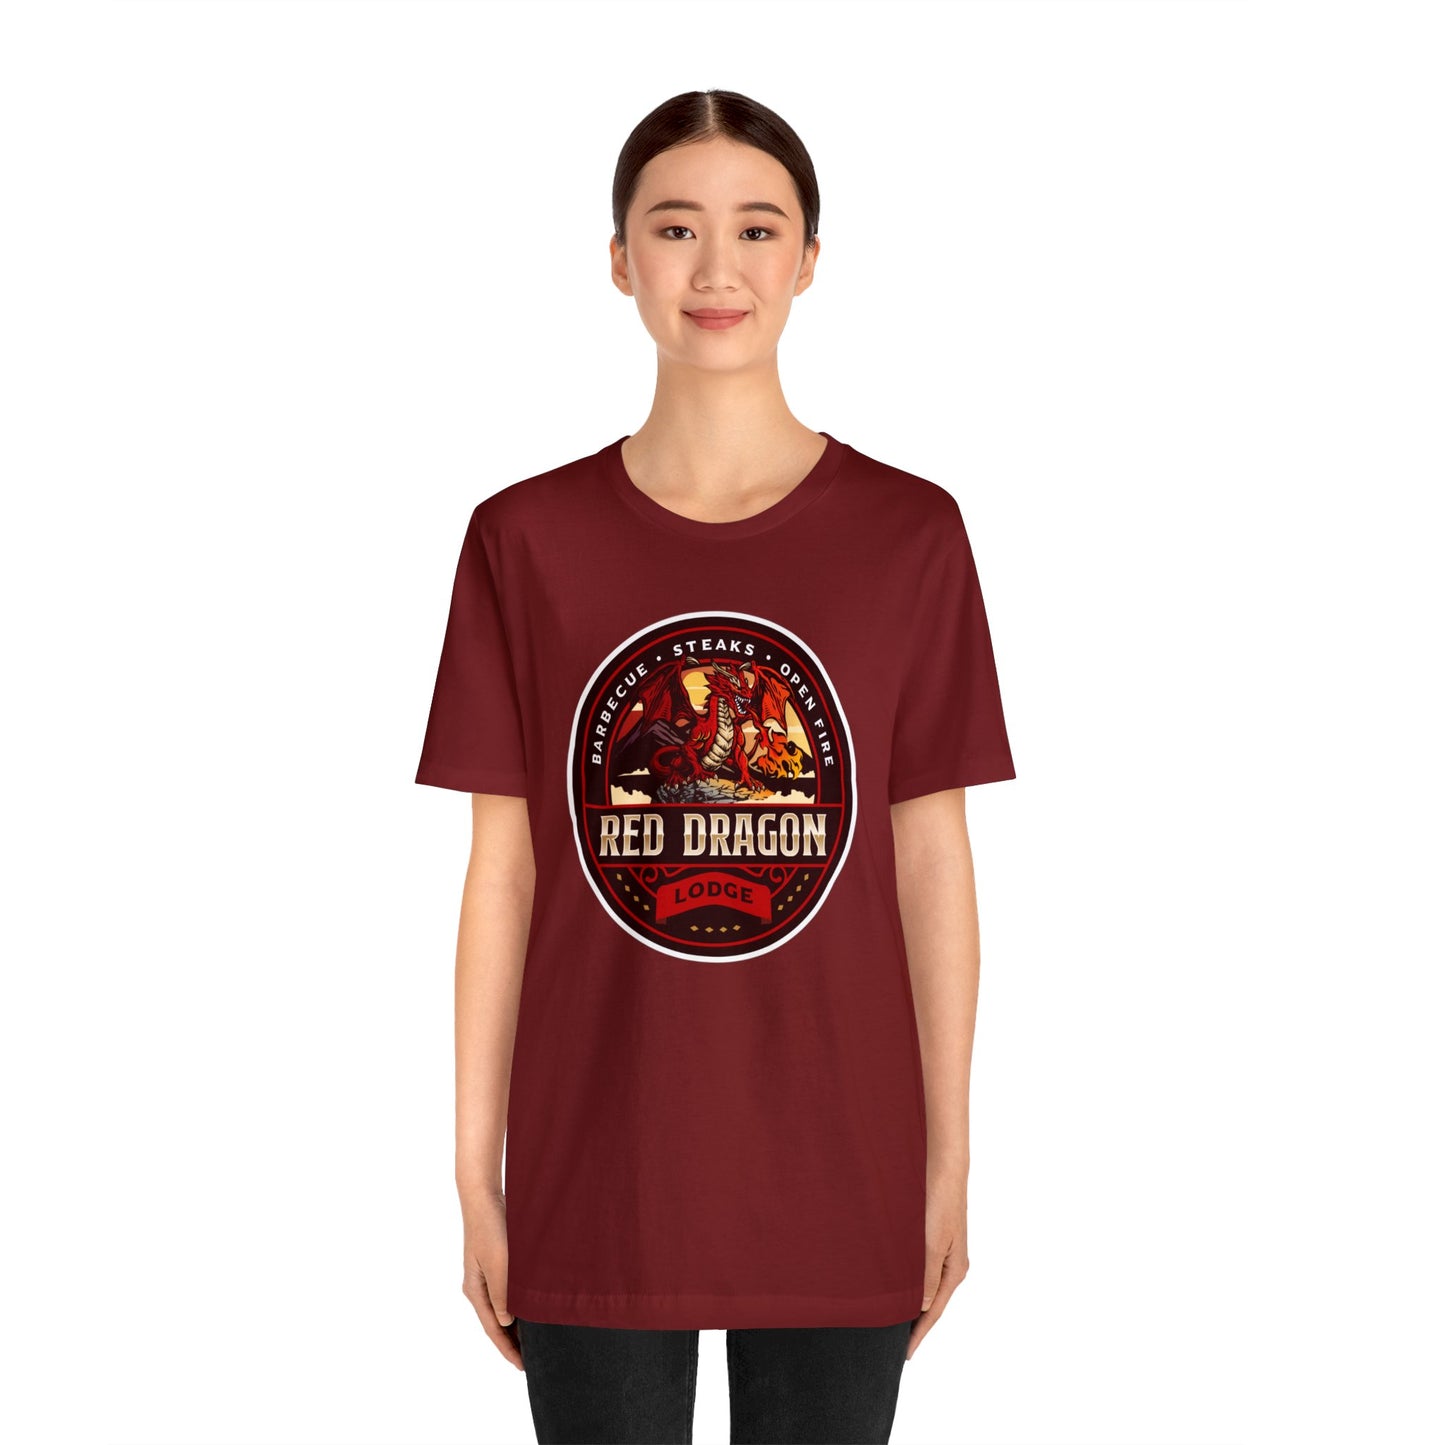 Red Dragon Lodge | Side Hustle Collection | Retail Fit Fantasy Geek Cotton T-shirt